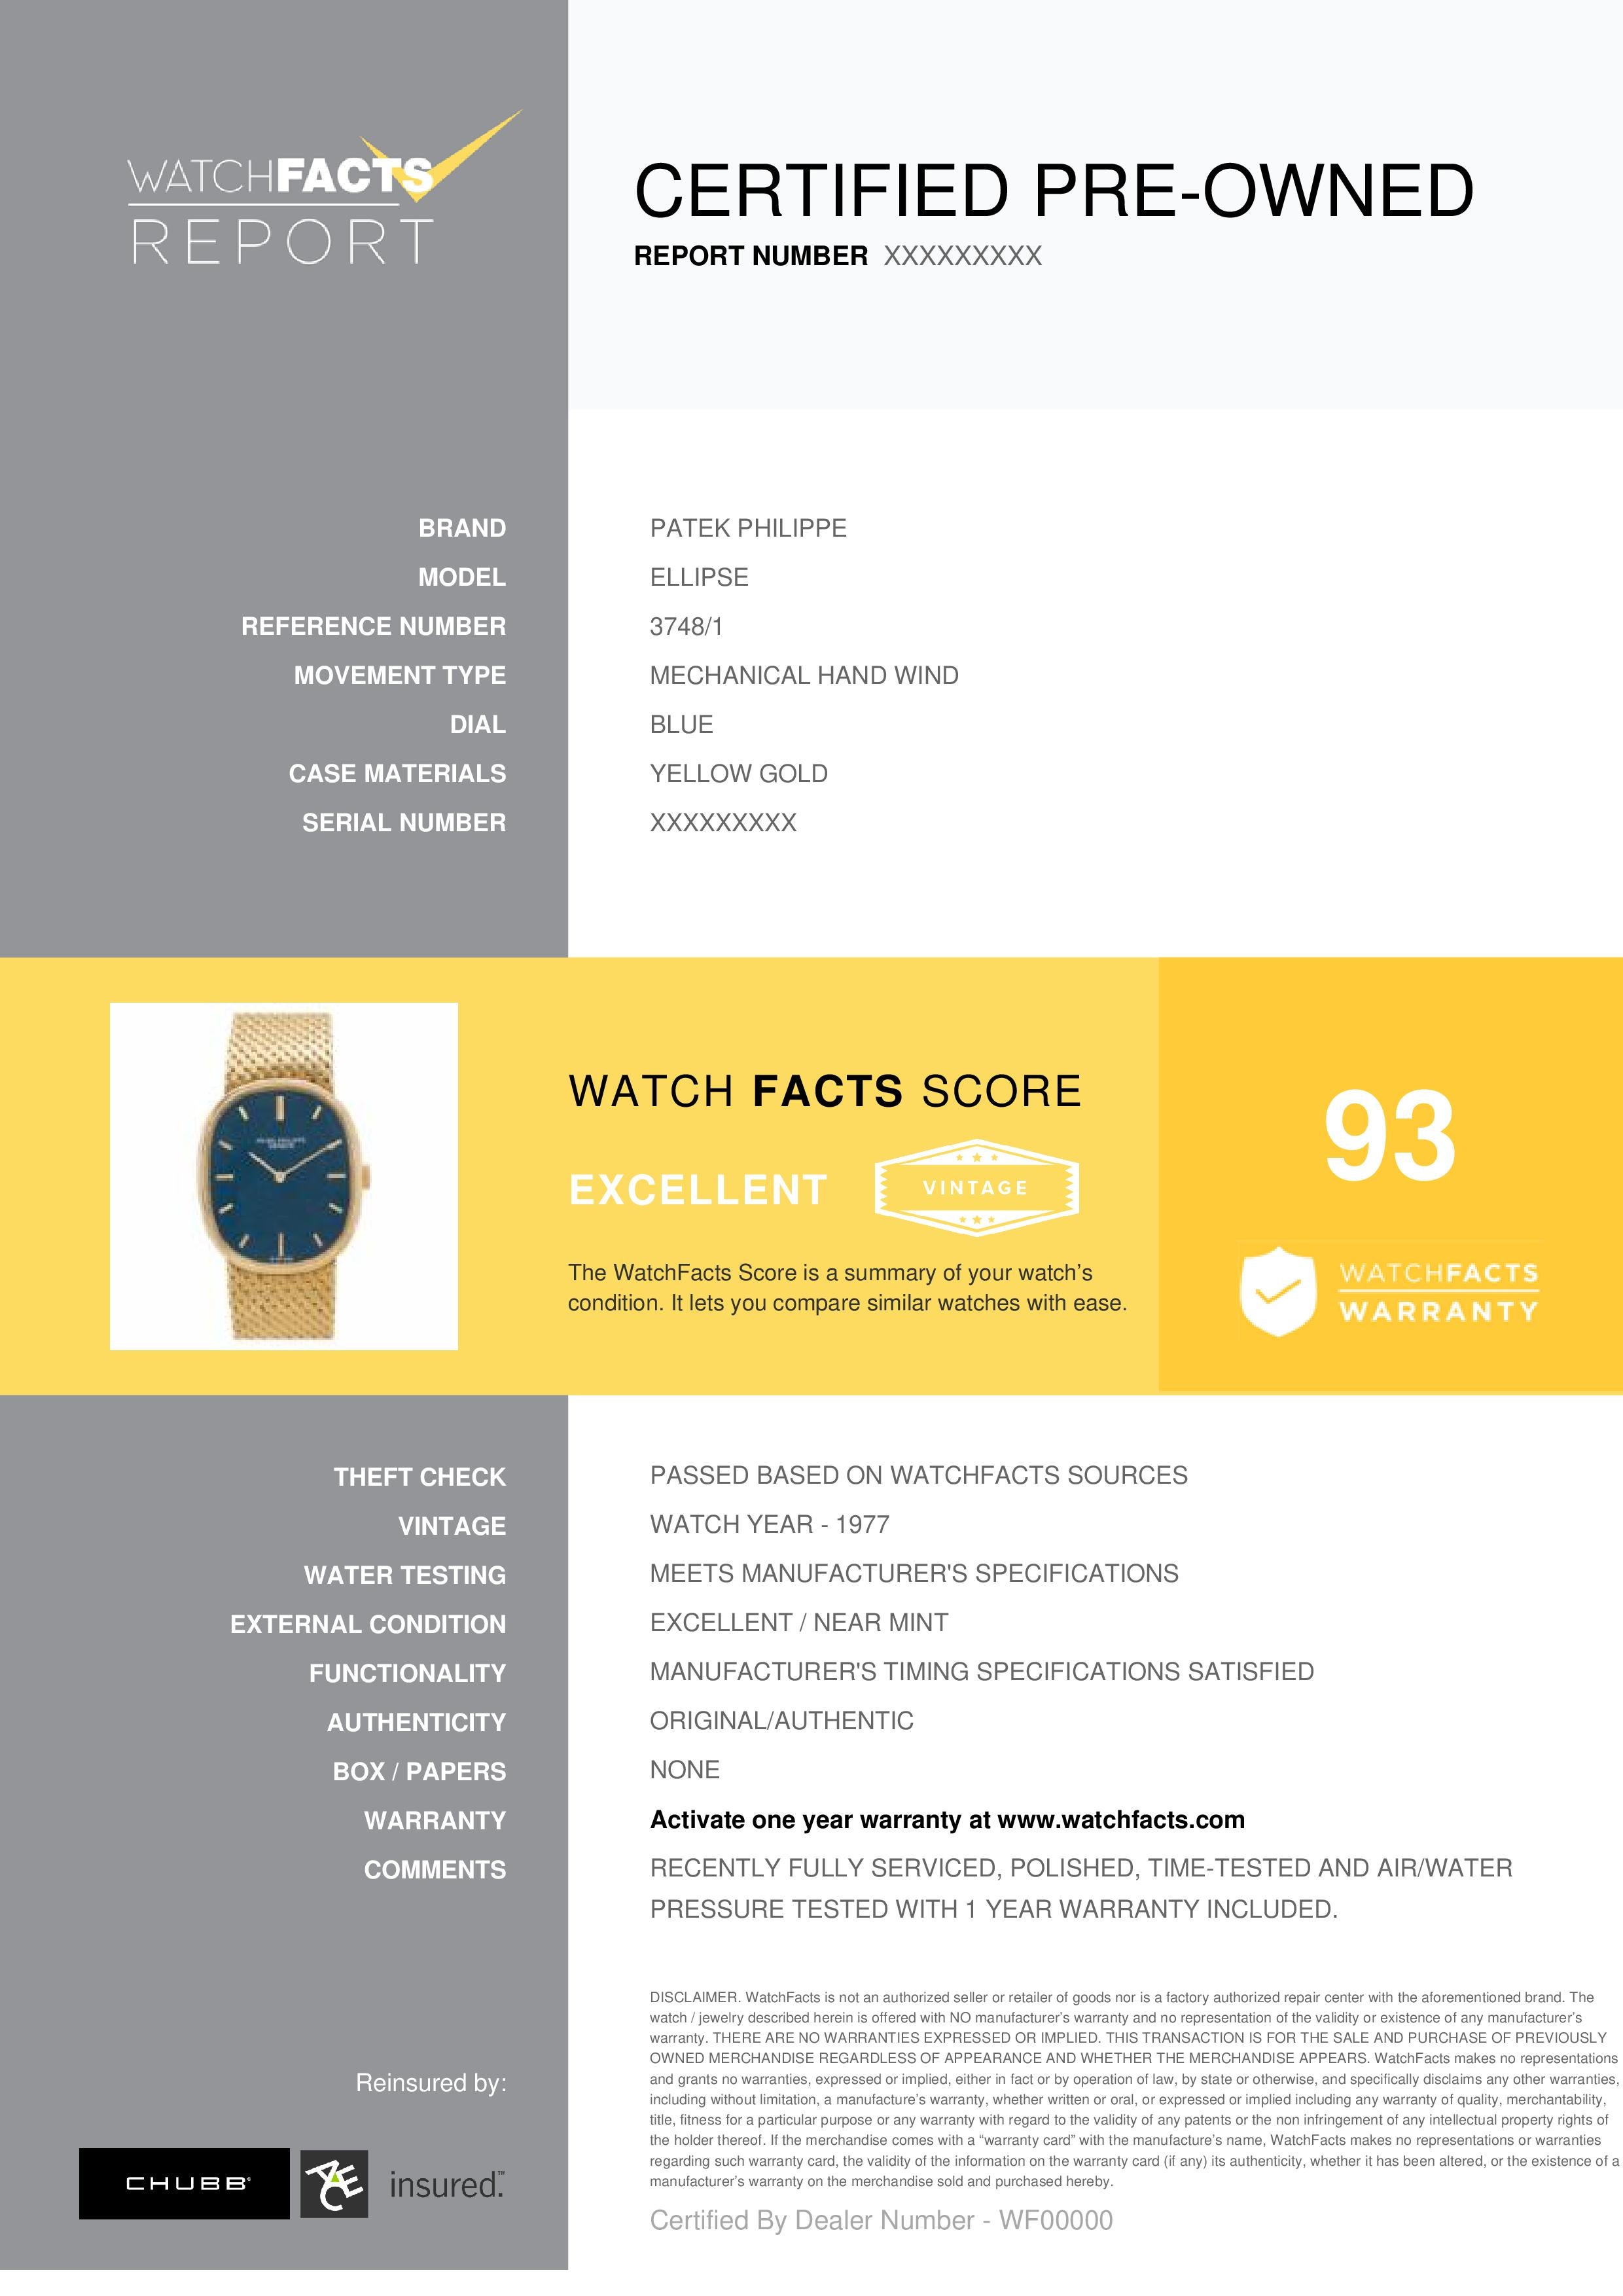 Patek Philippe Ellipse Reference #: 3748/1. Mens Mechanical Hand Wind Watch Yellow Gold Blue 32 MM. Verified and Certified by WatchFacts. 1 year warranty offered by WatchFacts.
